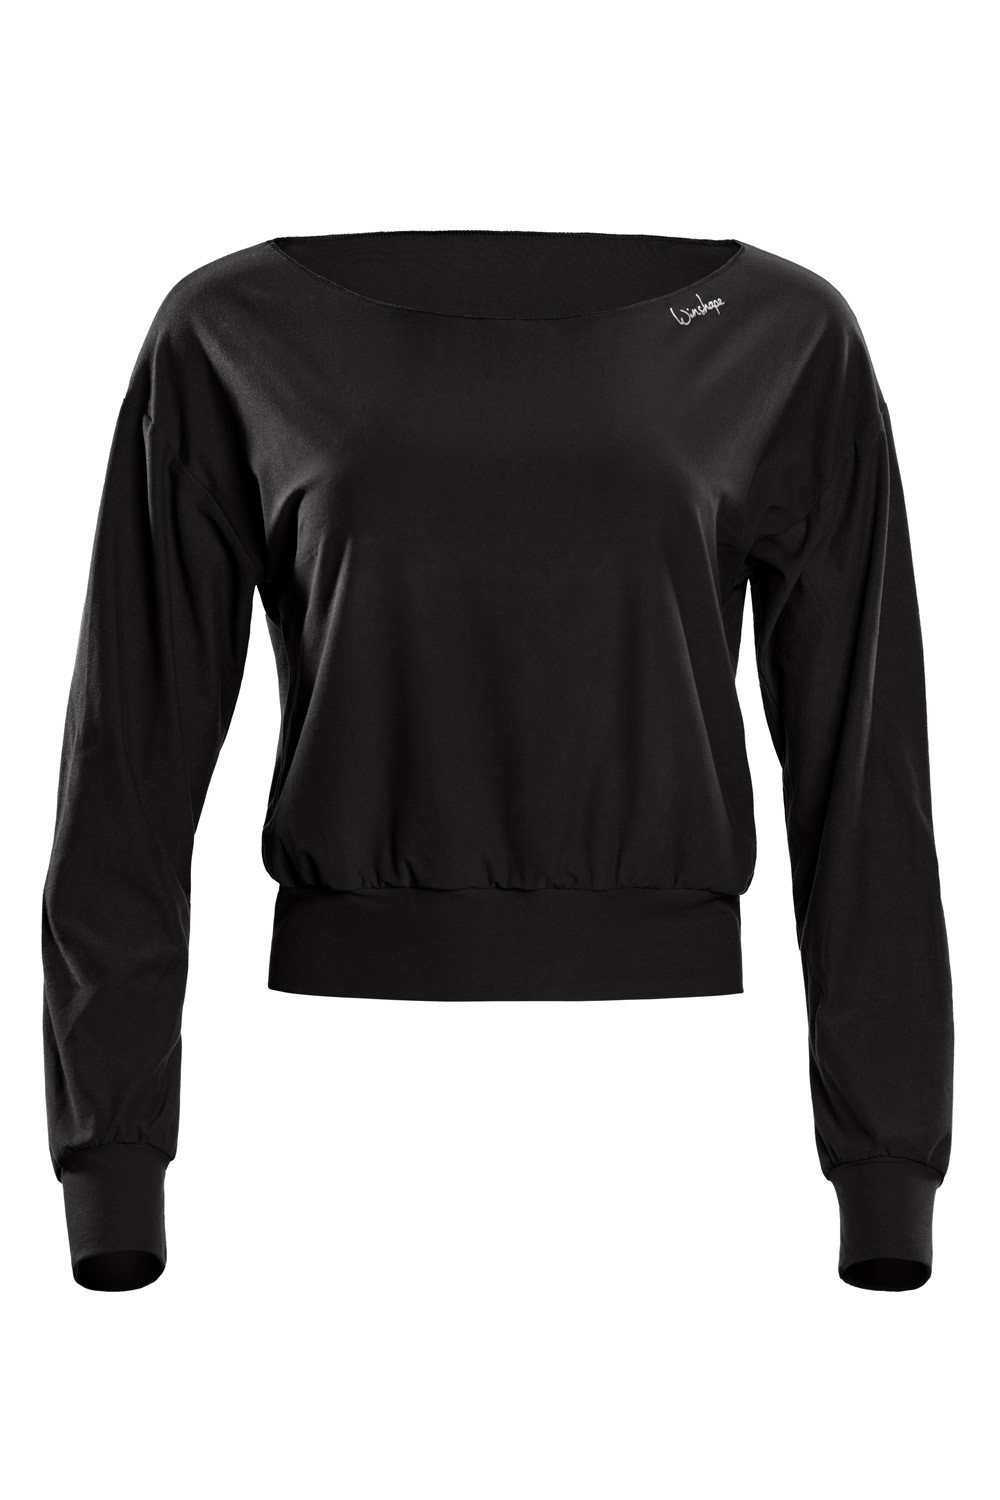 Style Functional LS003LS, Street schwarz, Cropped Long Winshape Sleeve Soft Top and Light